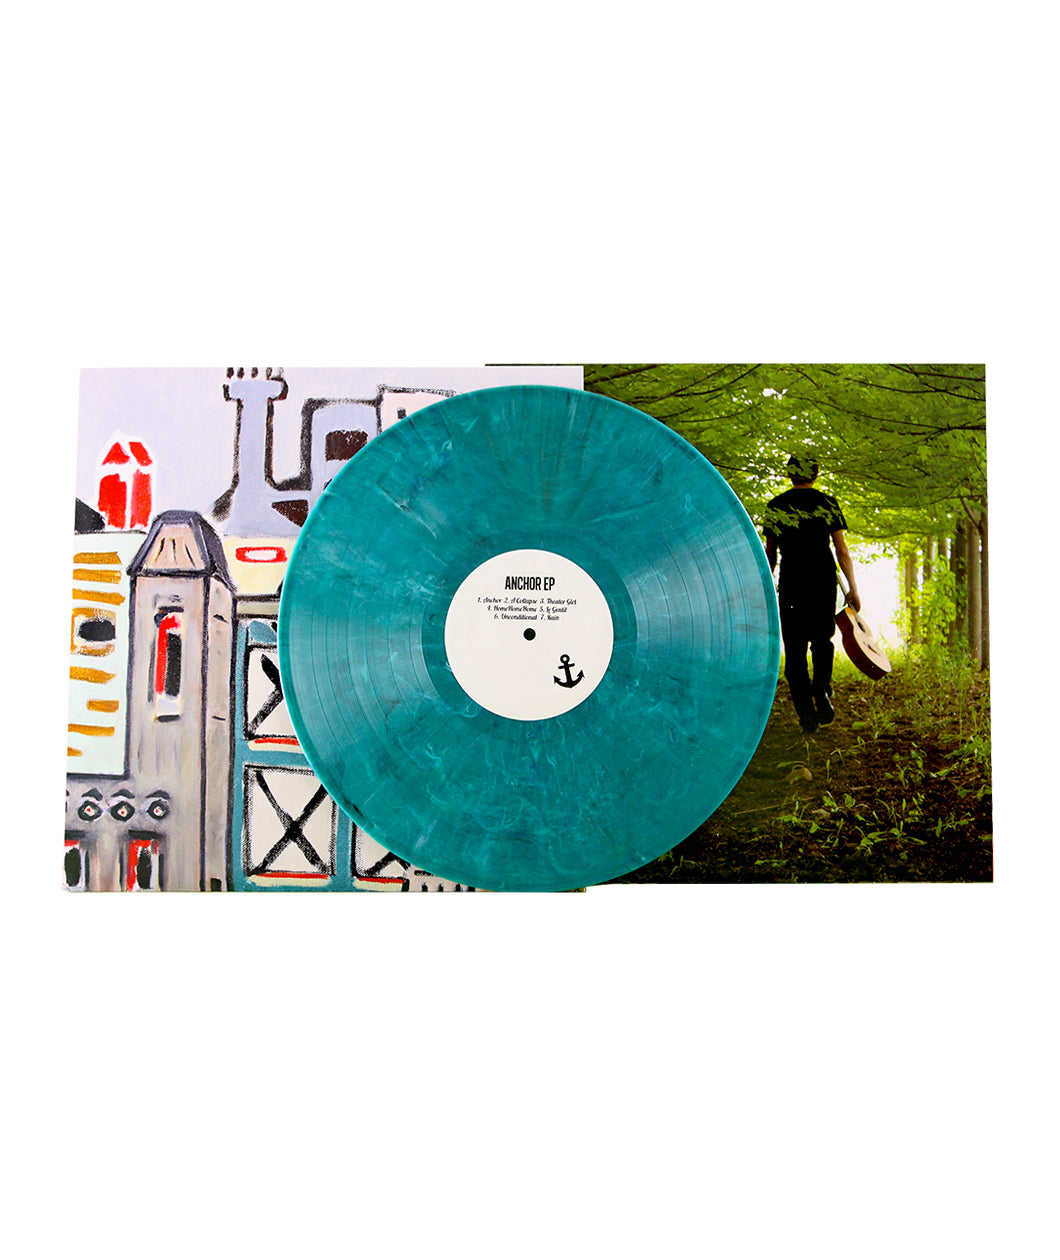 A teal vinyl in the middle reading "Anchor EP". On the right side of the vinyl is an image of a man walking in a forest holding a guitar in one hand. On the other side is an image of drawn, colorful buildings. From Rob Scallon.